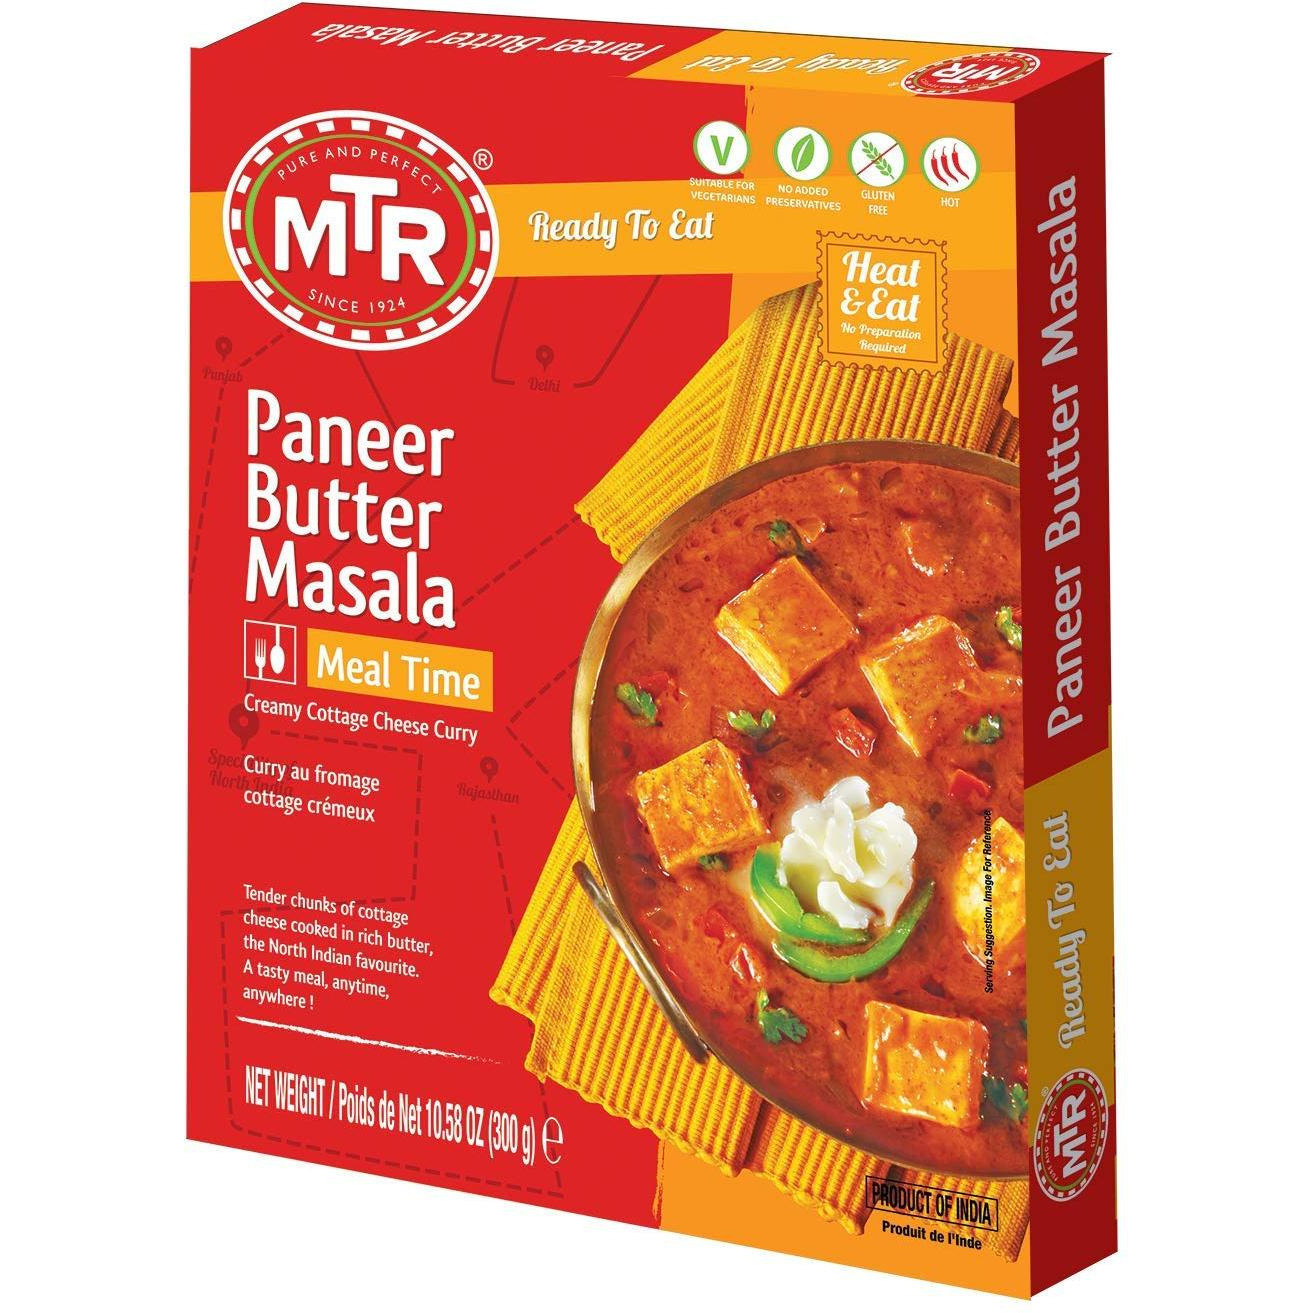 Pack of 2 - Mtr Ready To Eat Paneer Butter Masala - 300 Gm (10.5 Oz)